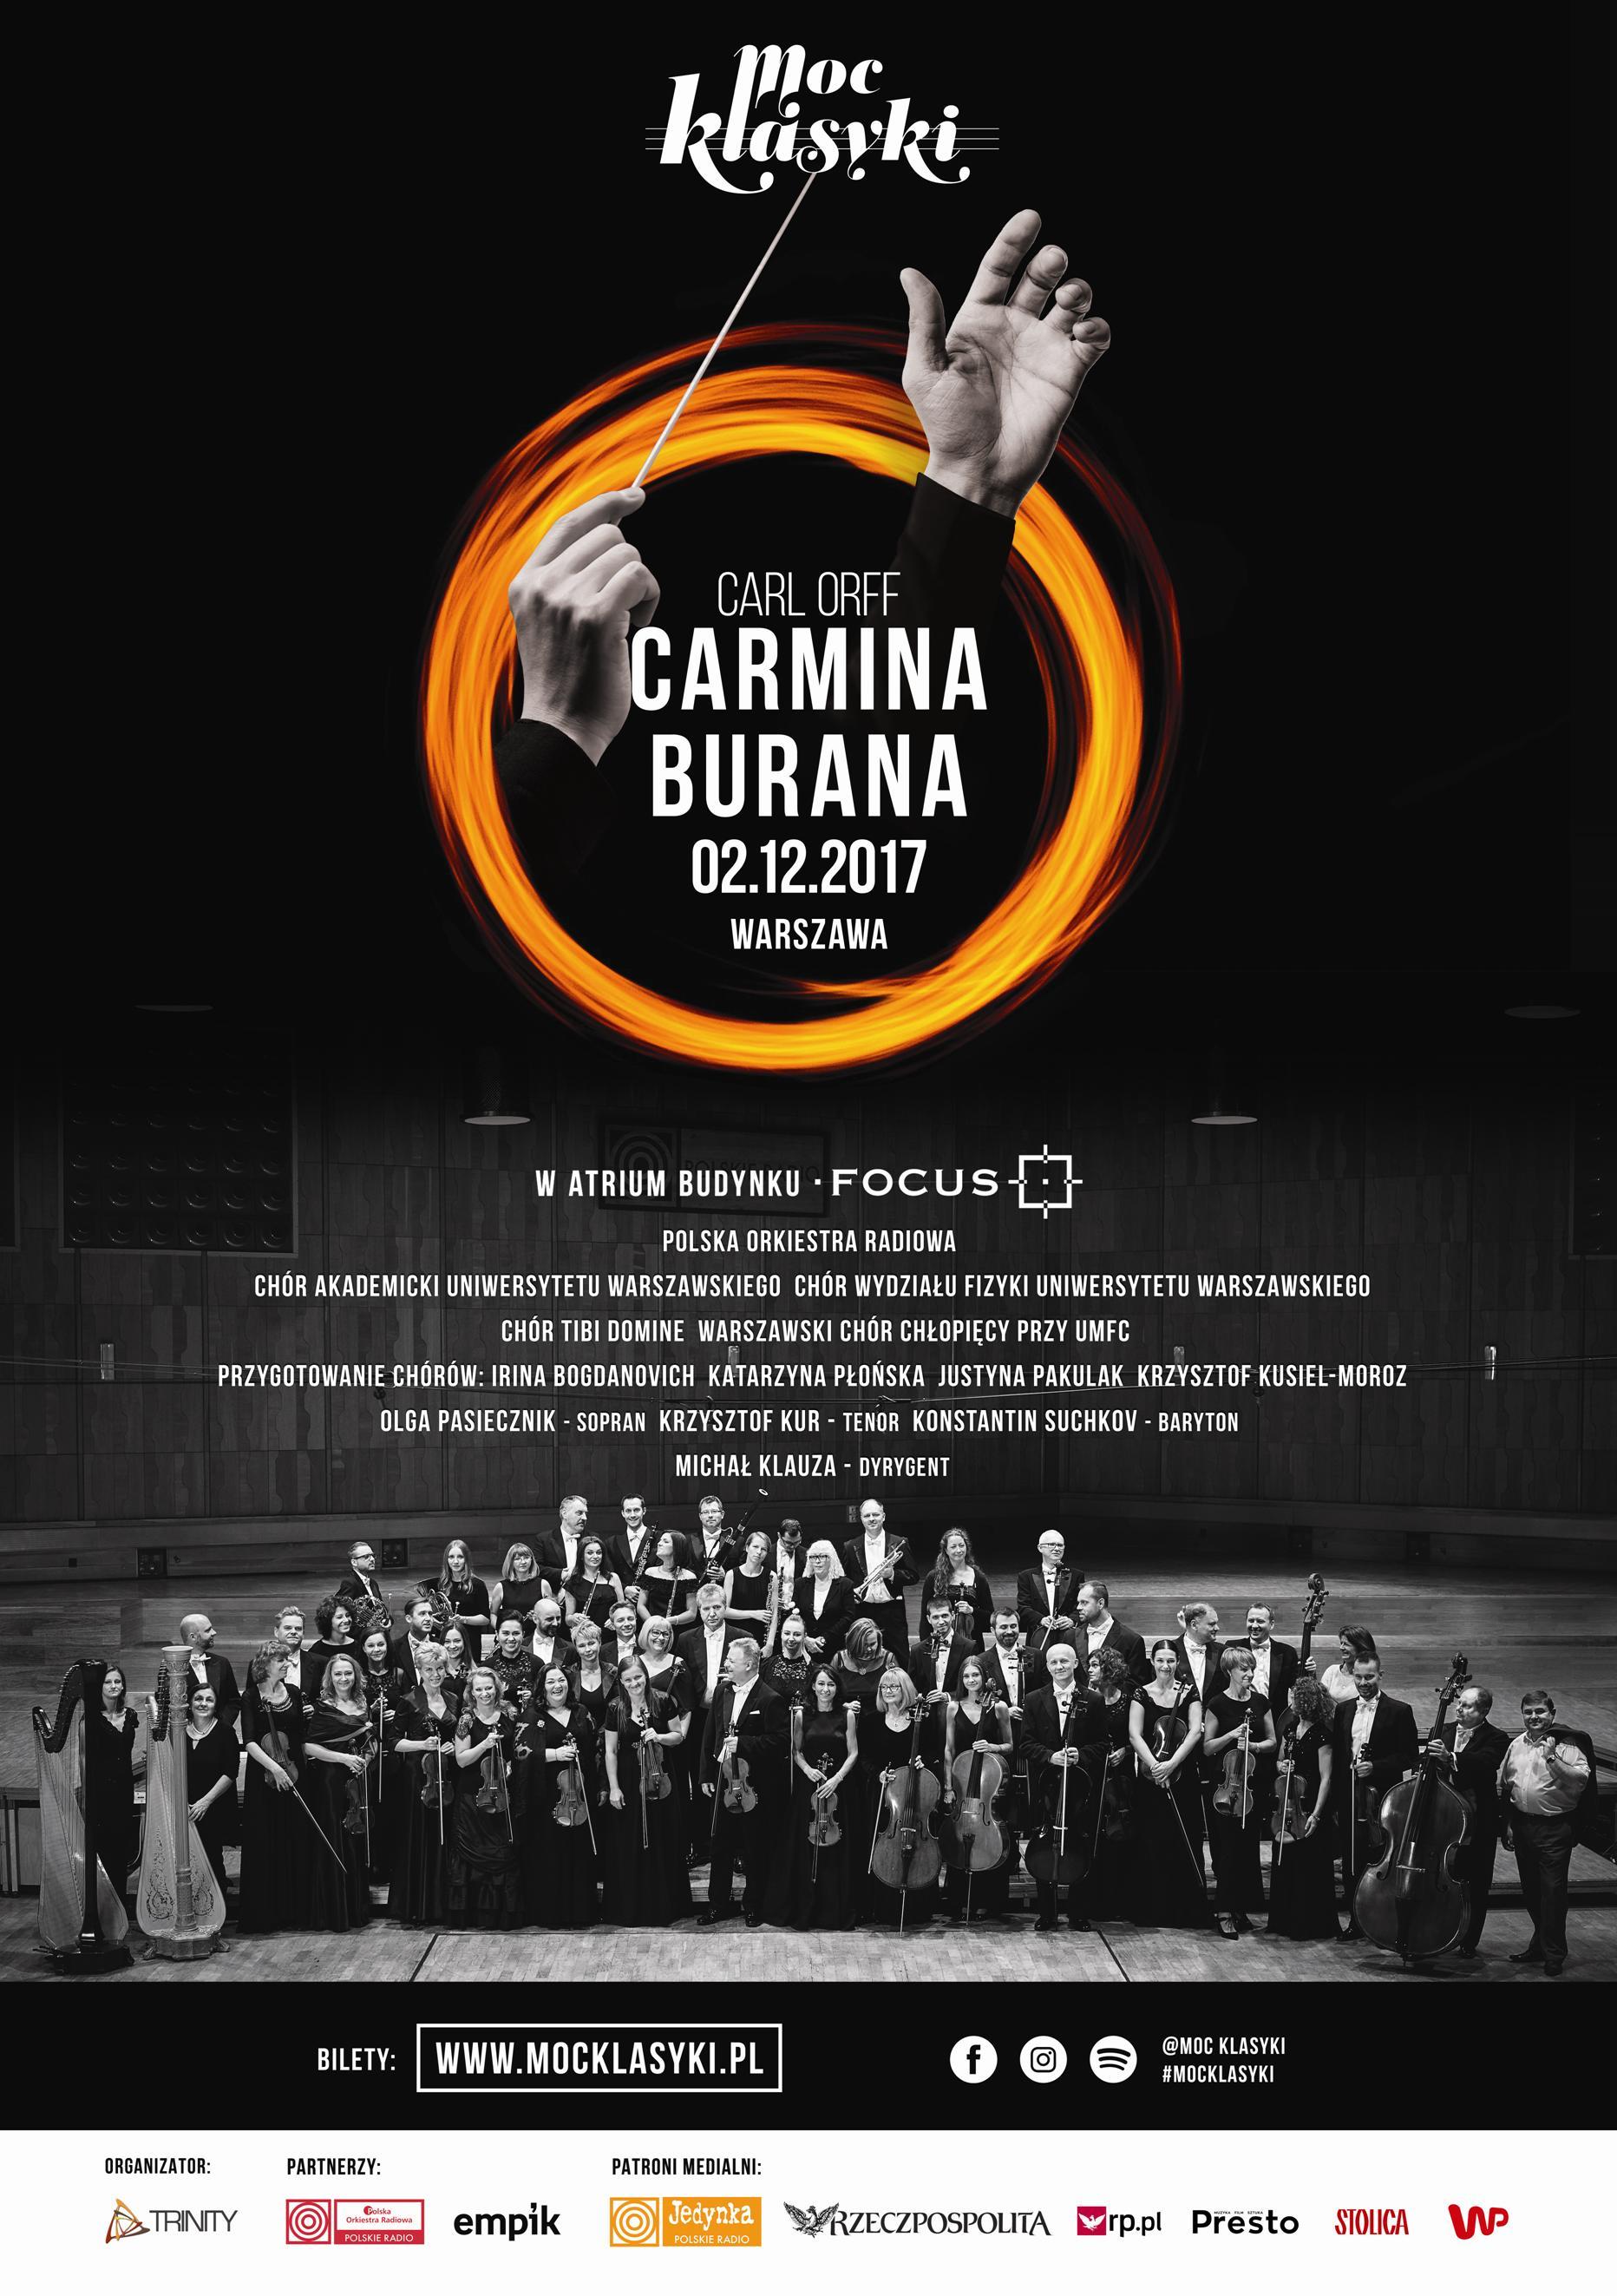 Symphonic hit “Carmina Burana” in the FOCUS building in Warsaw